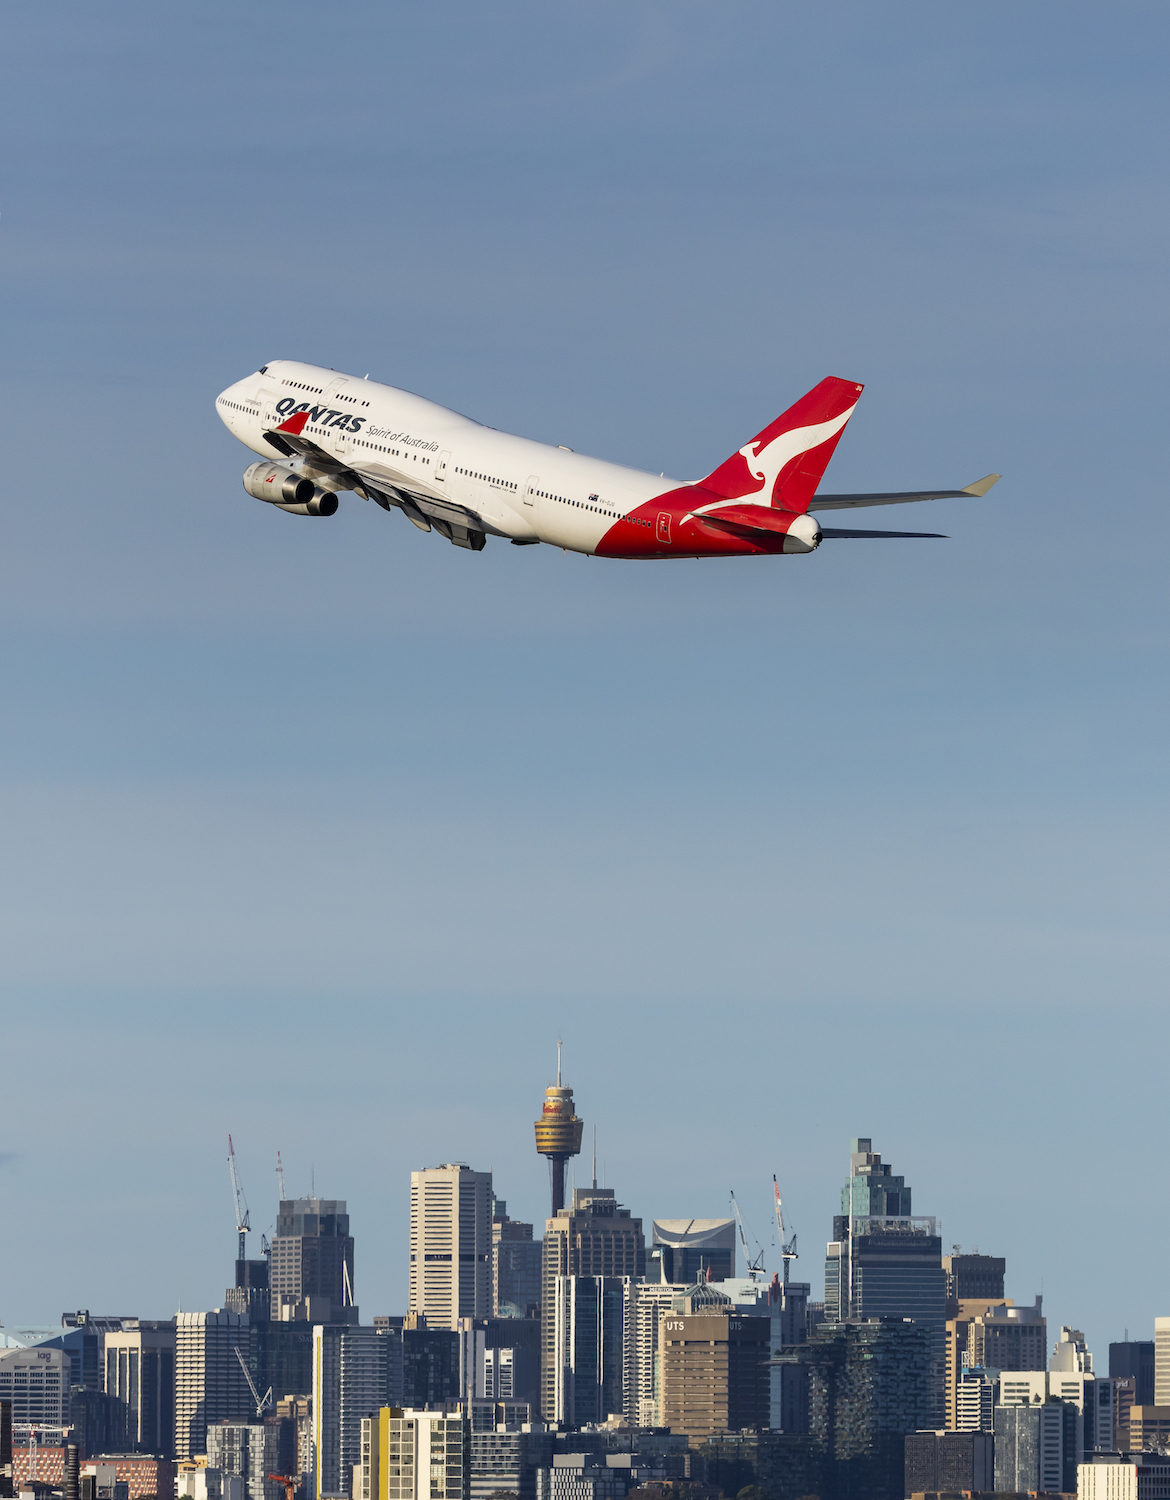 Qantas Boeing 747-400 VH-OJU on the way from Sydney to Los Angeles as the QF99. (Seth Jaworski)